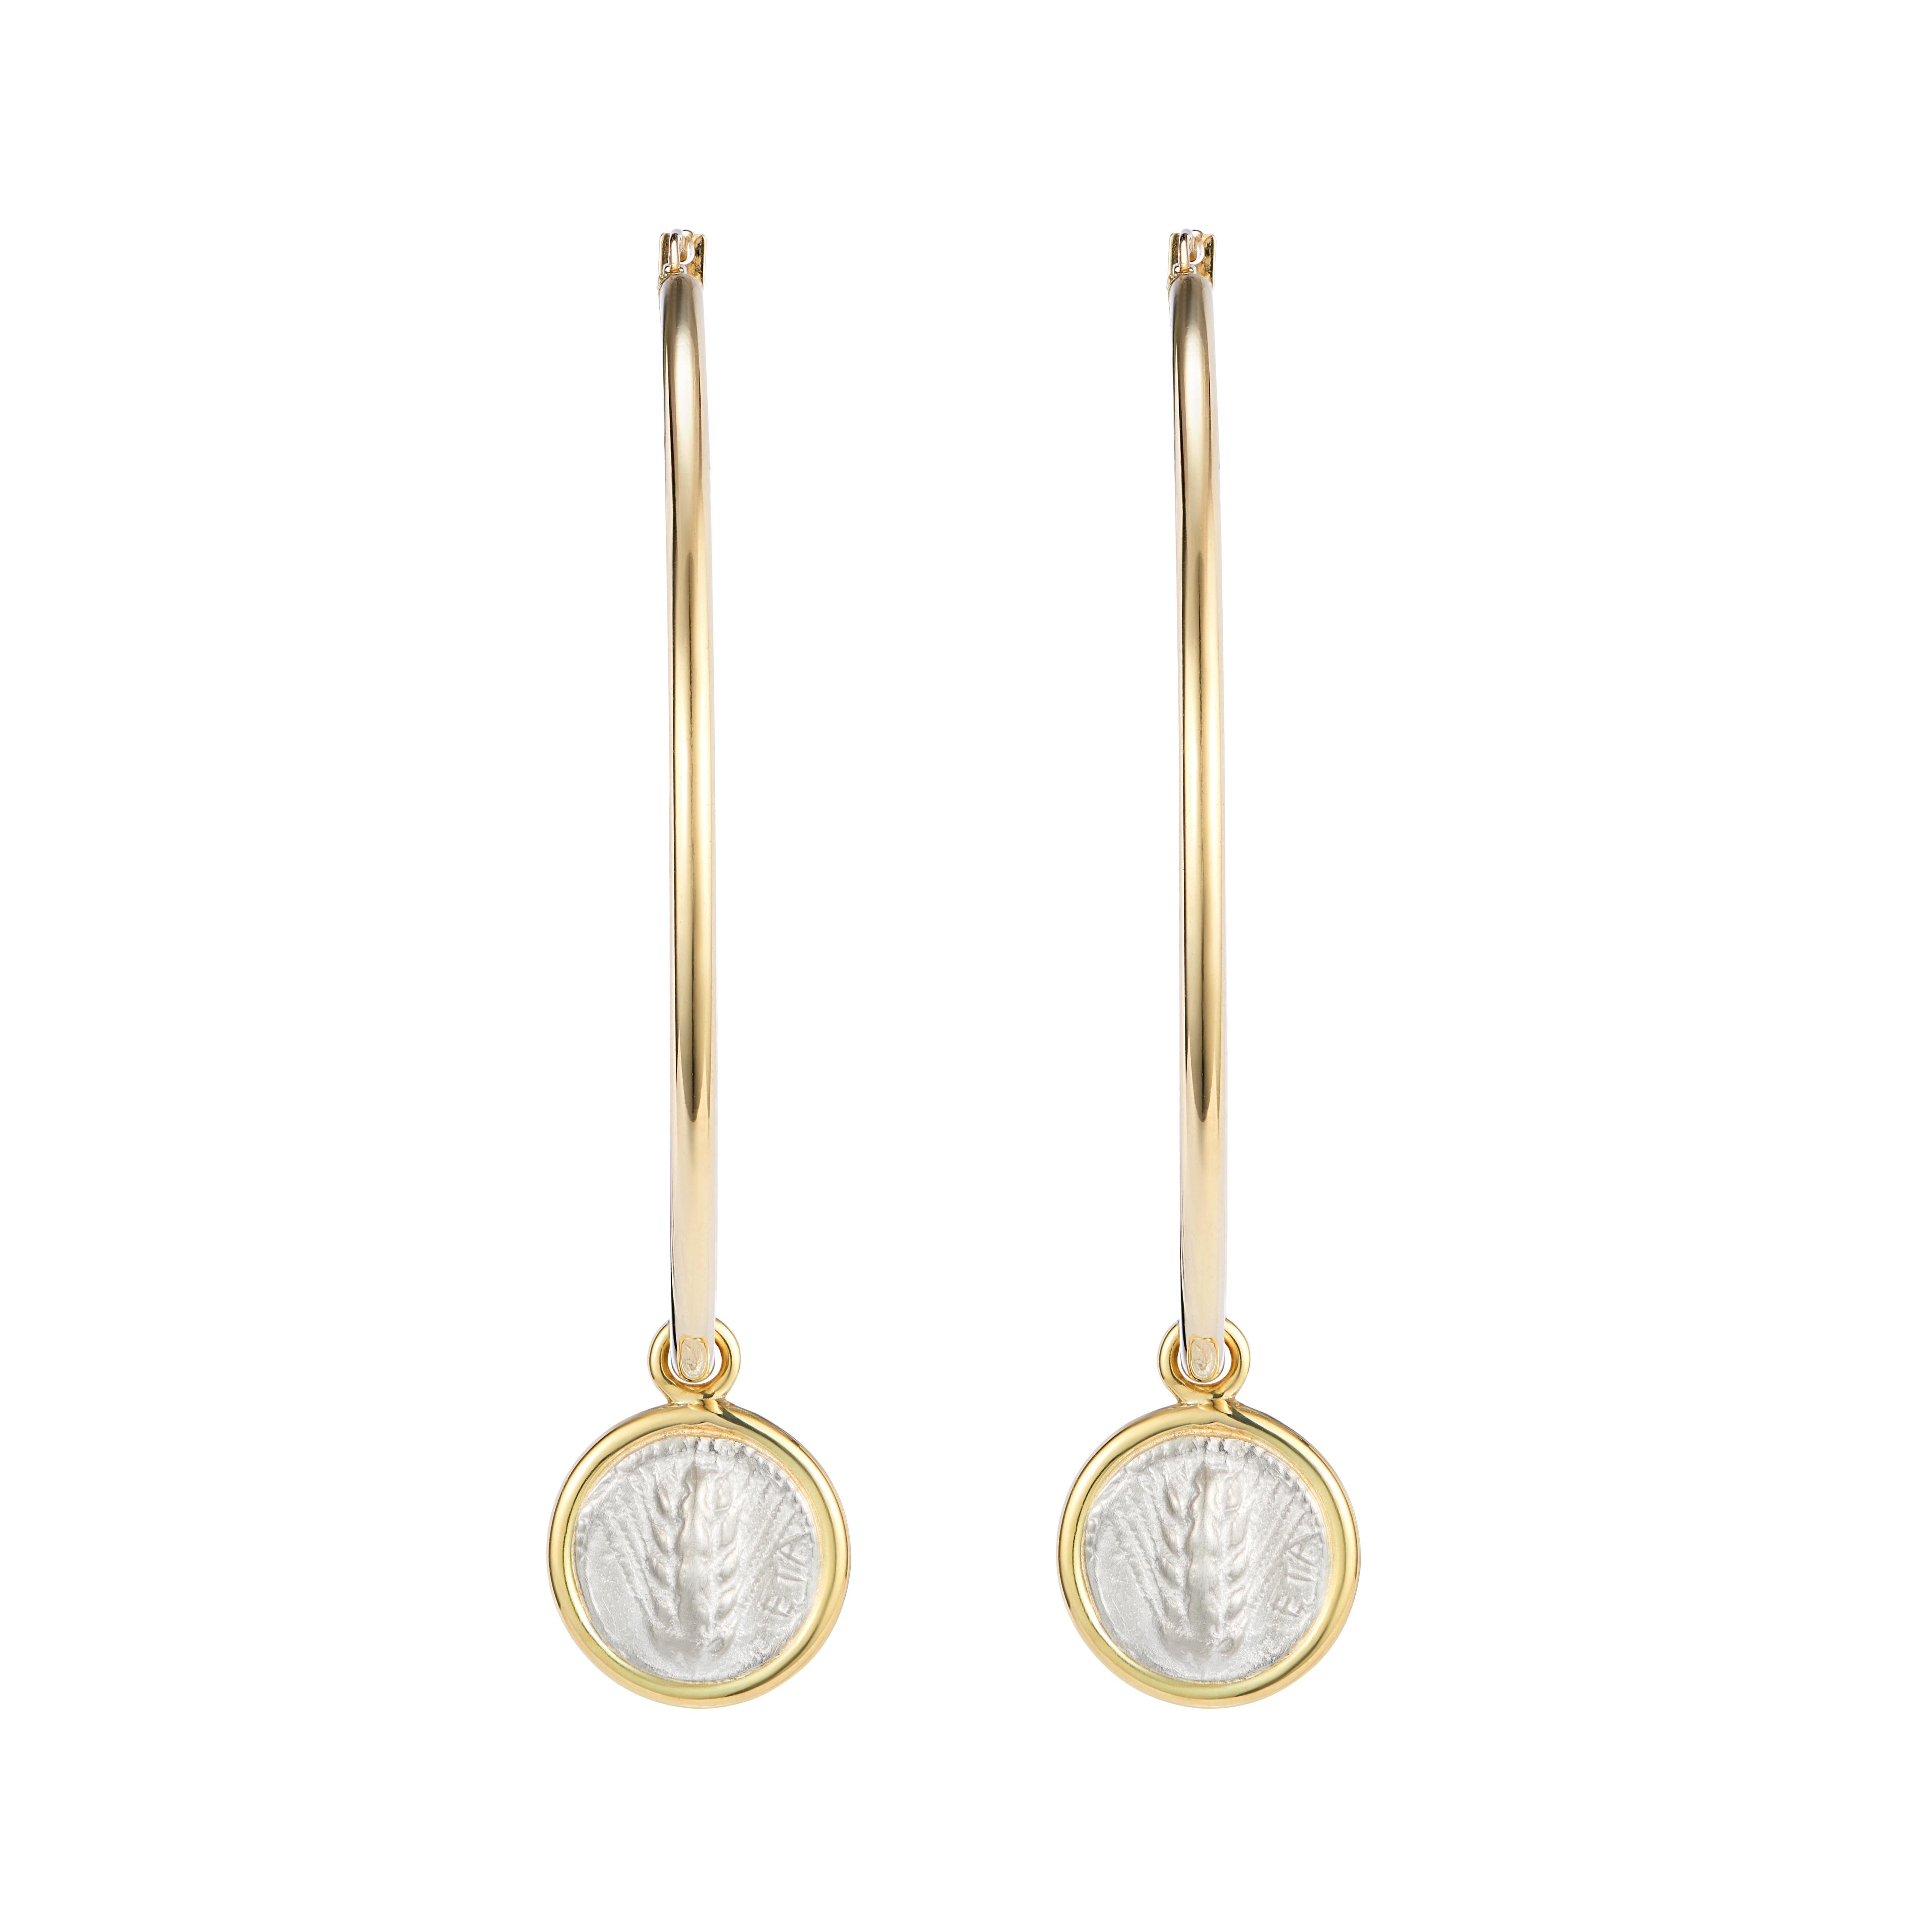 These Dubini coin hoop earrings from the 'Empires' collection feature sterling silver replicas of Thracian silver coin minted circa 4th century B.C. set in 18kt yellow gold.

Chersonesos was founded in the 8th Century B.C. by settlers from Thrace.